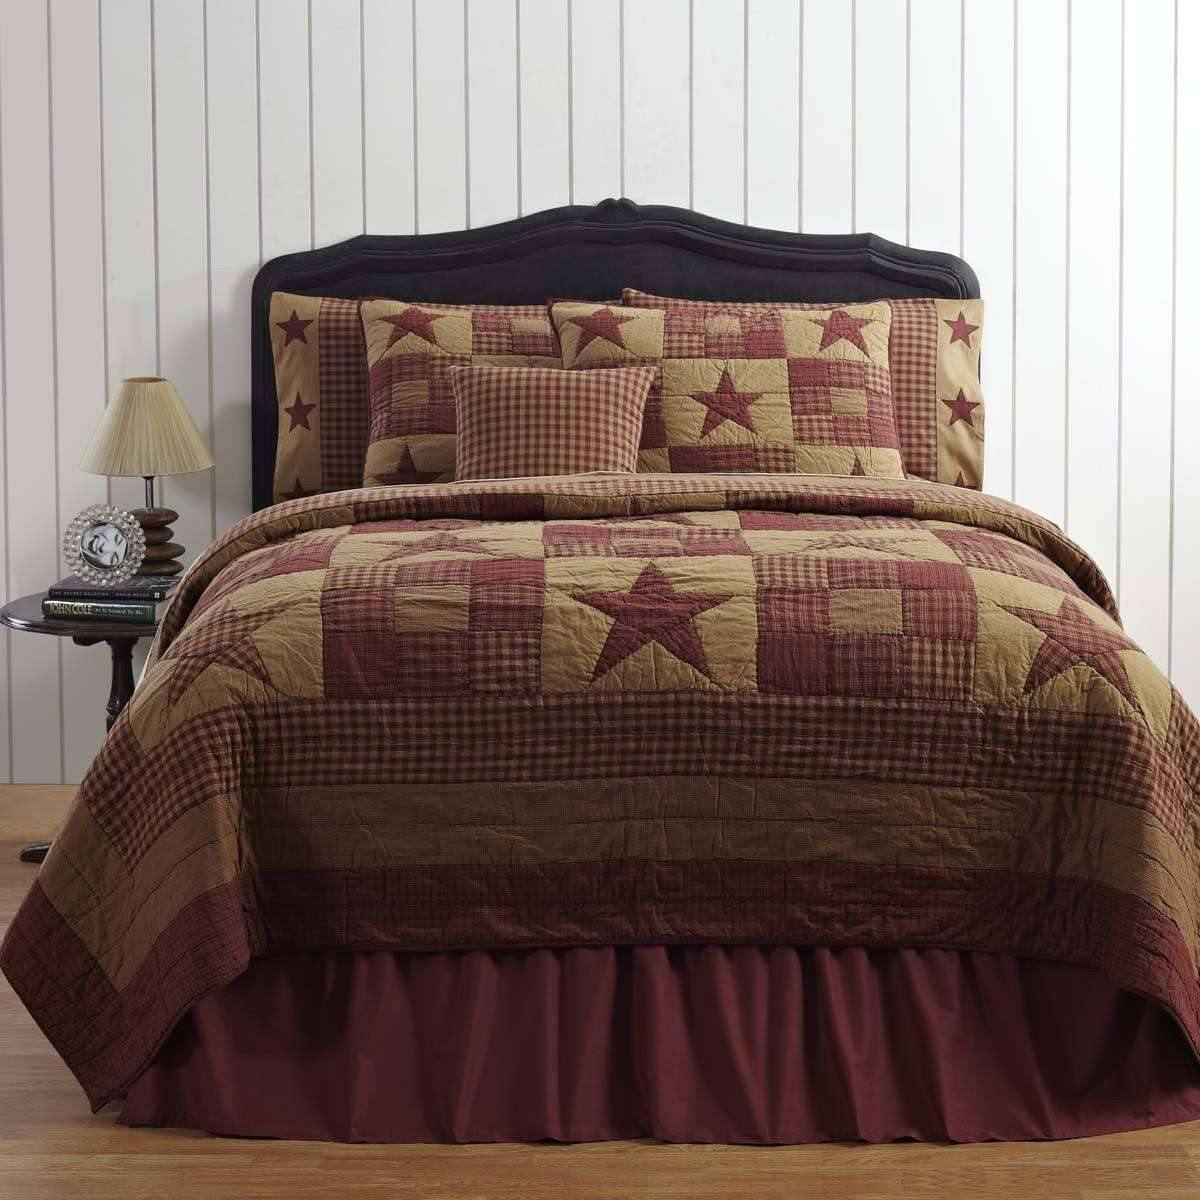 Ninepatch Star Luxury King Quilt 120Wx105L VHC Brands